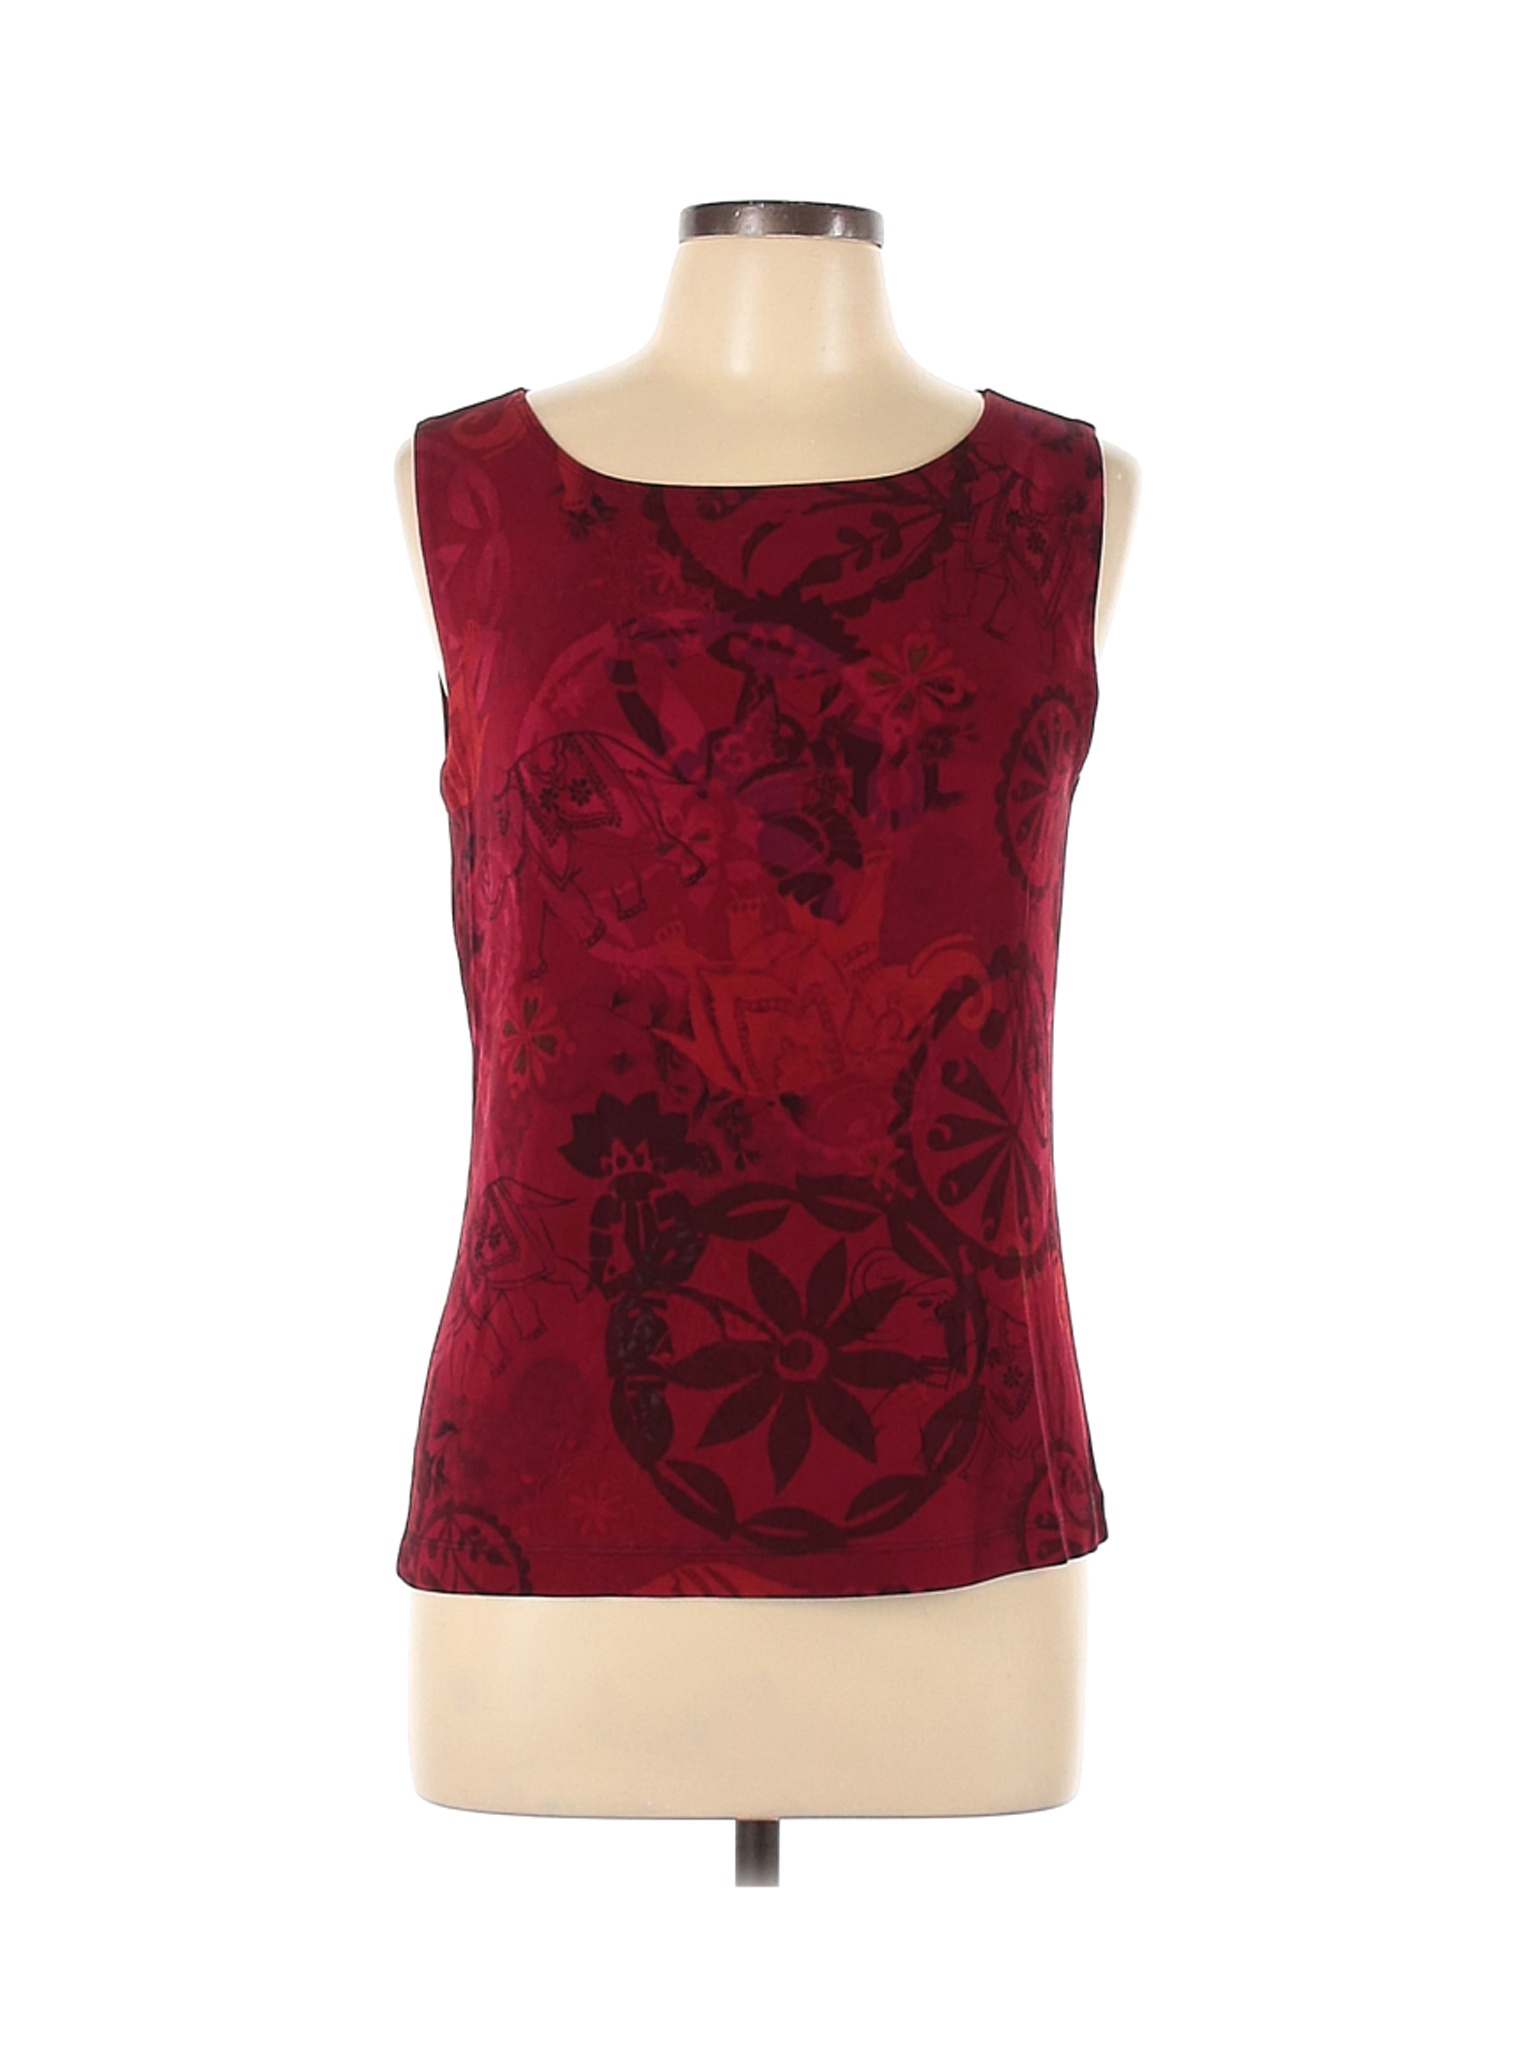 Travelers by Chico's Women Red Sleeveless Top L | eBay